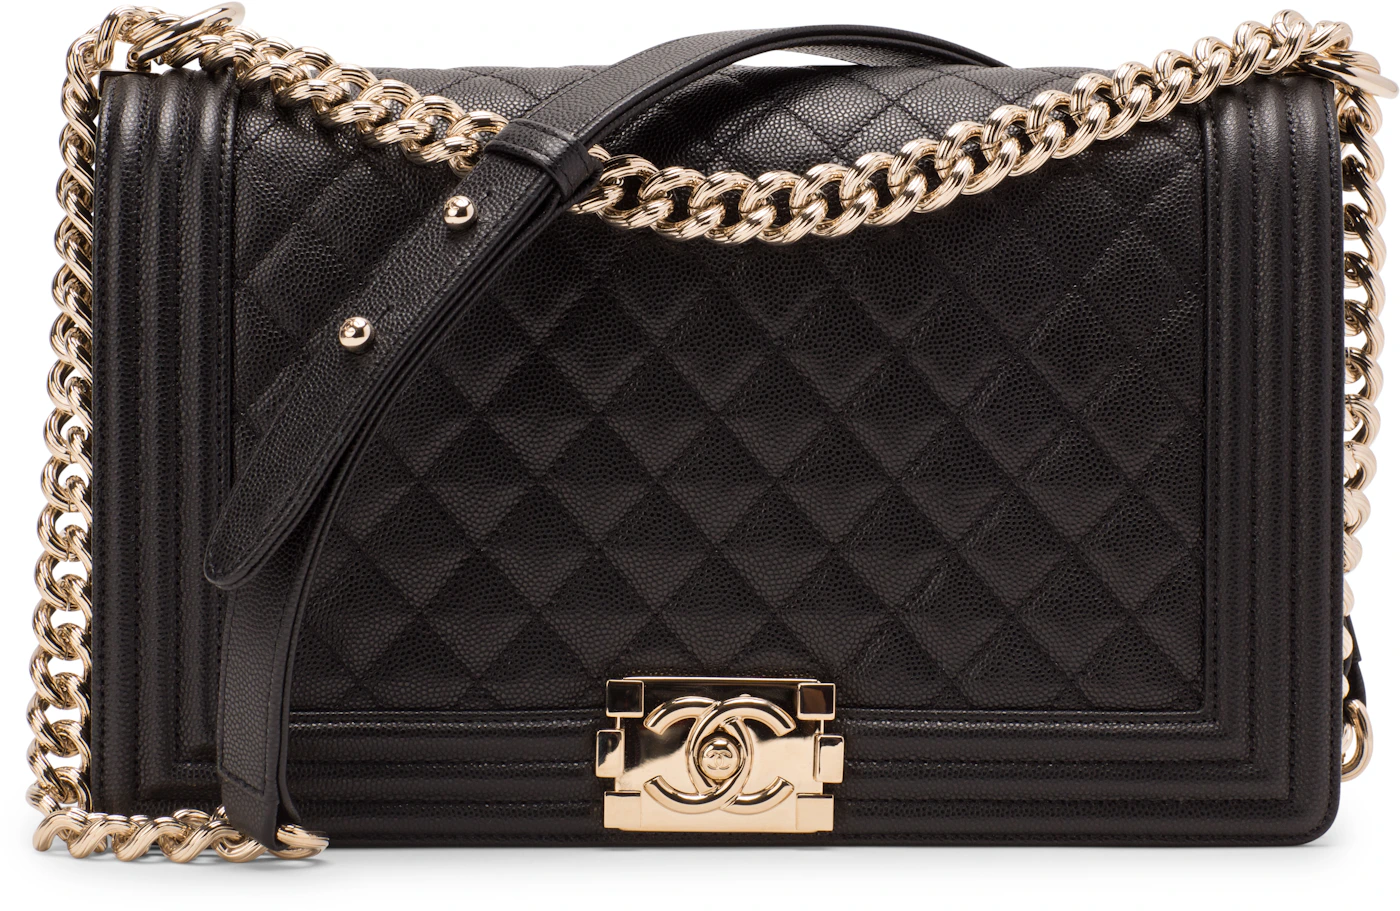 Chanel Handbags! But which is best?! Gold or Silver Hardware